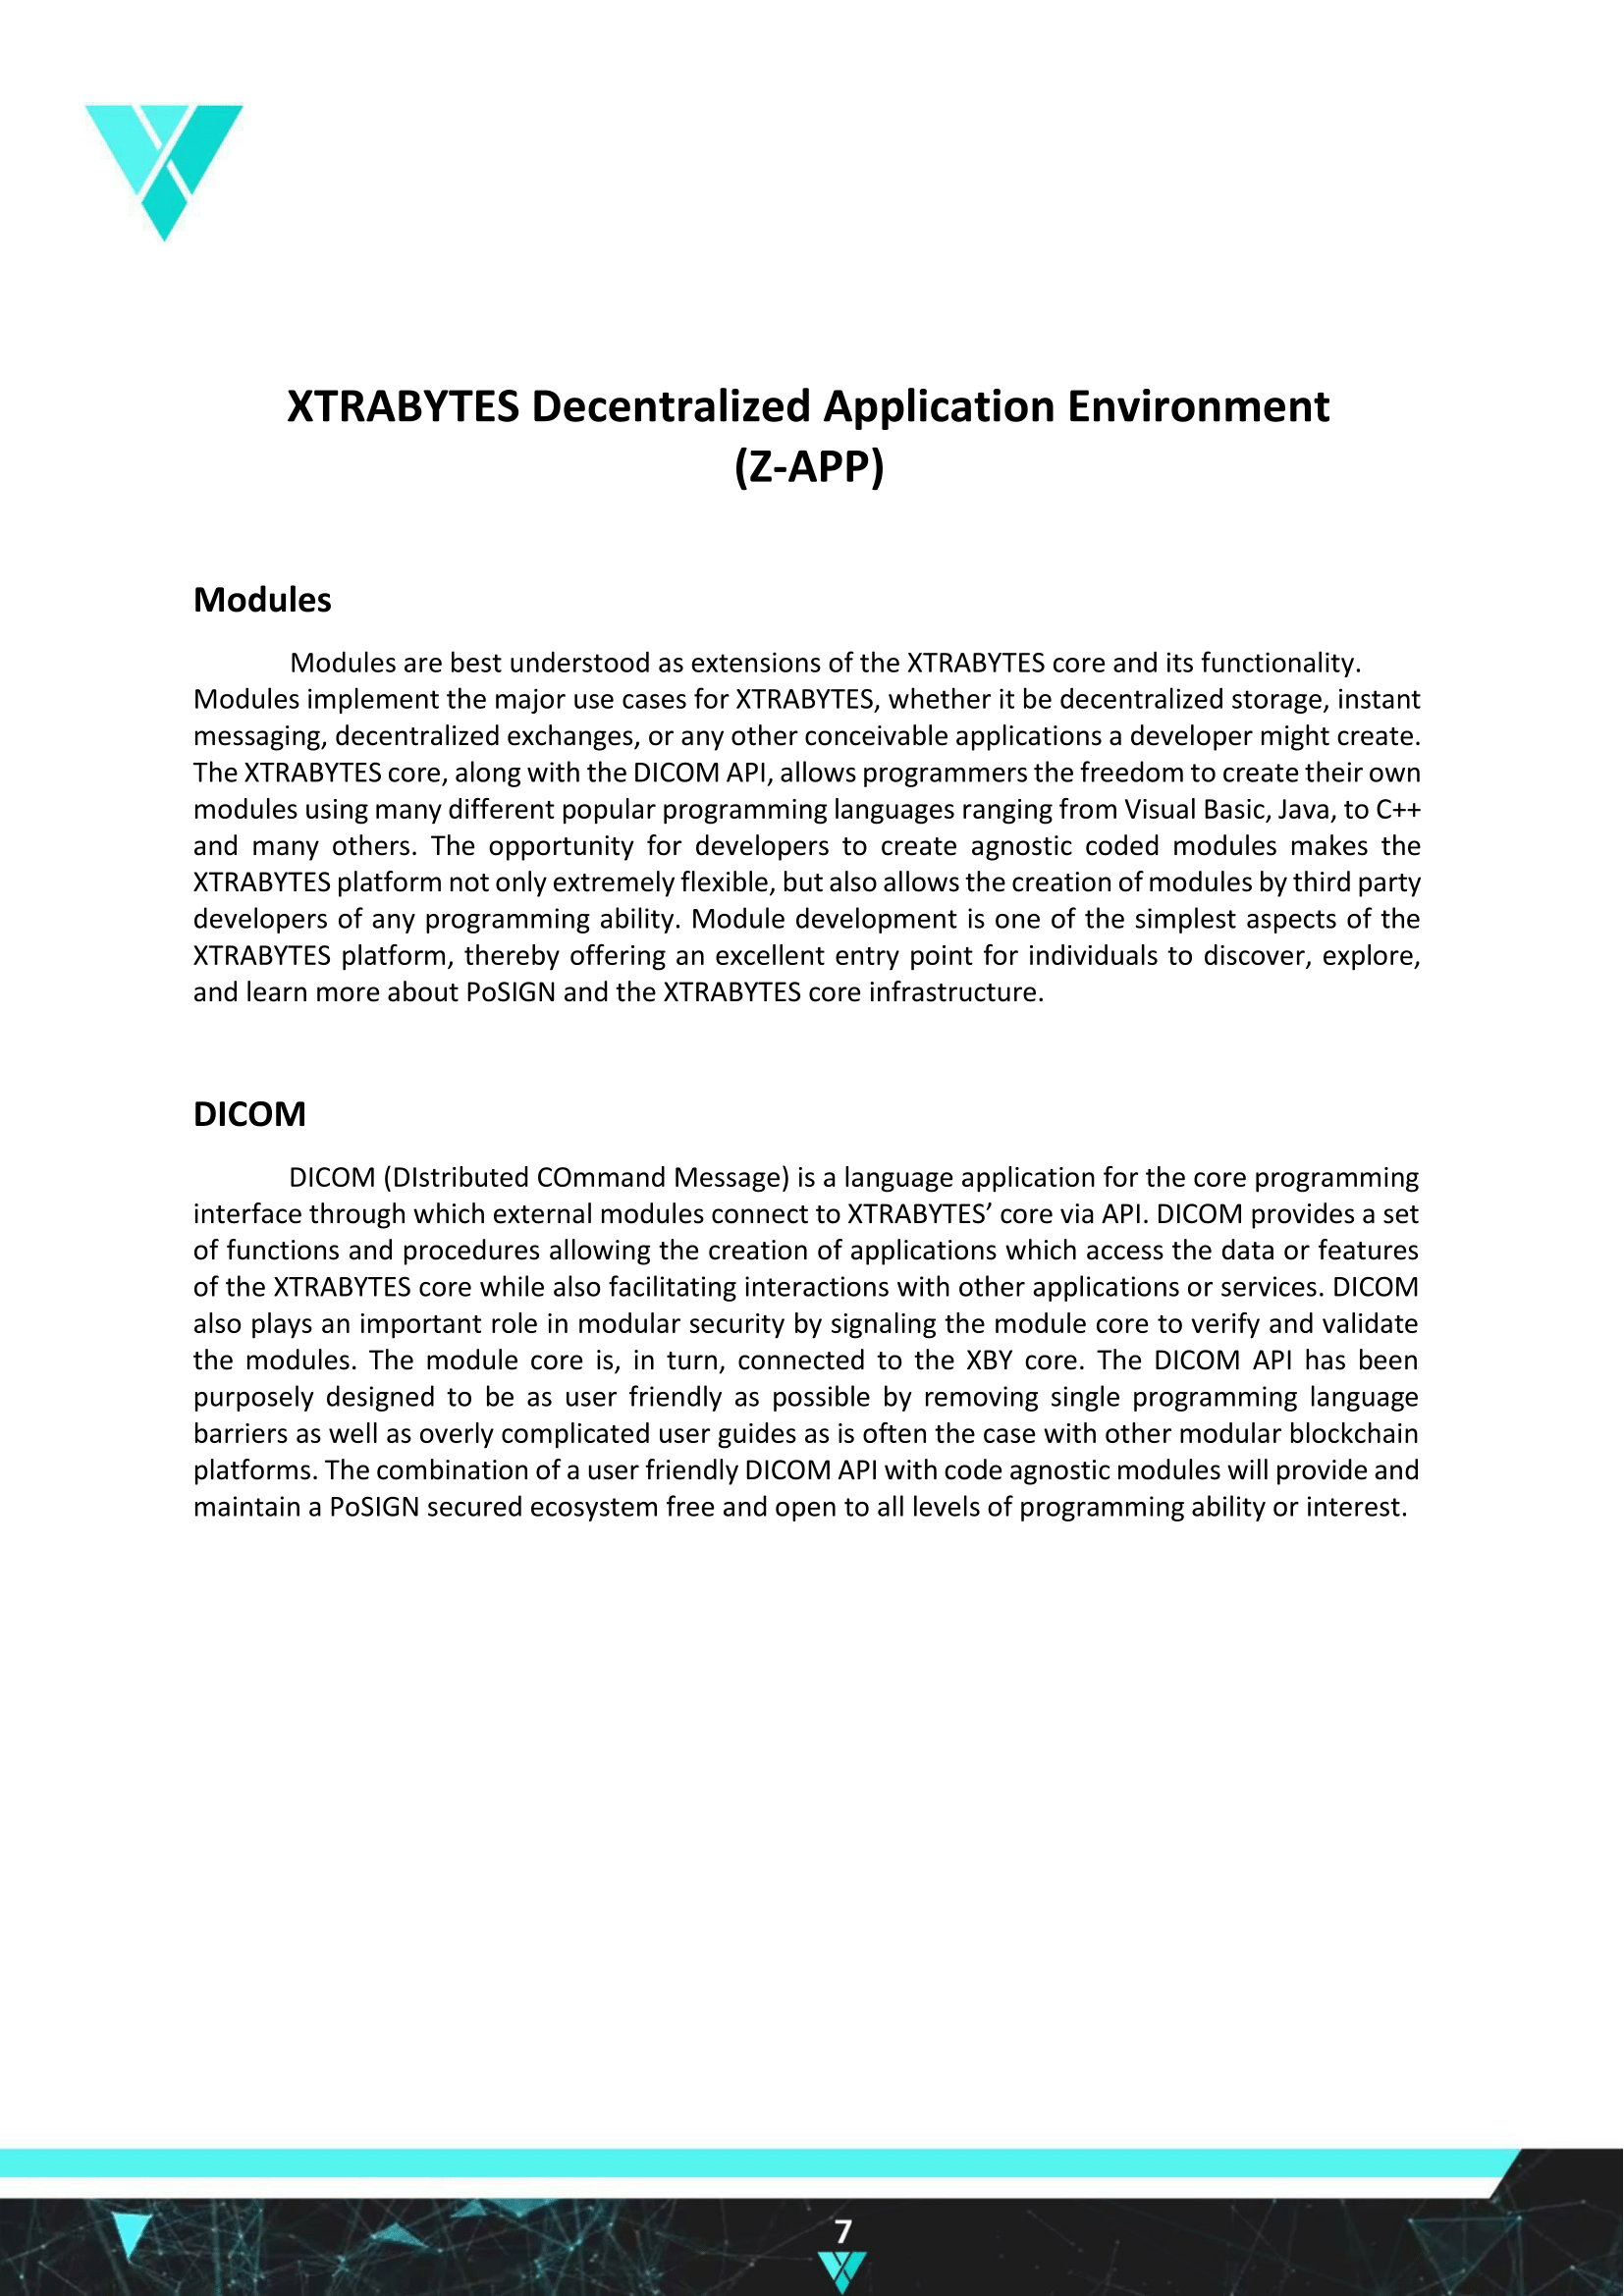 whitepaper-7.png